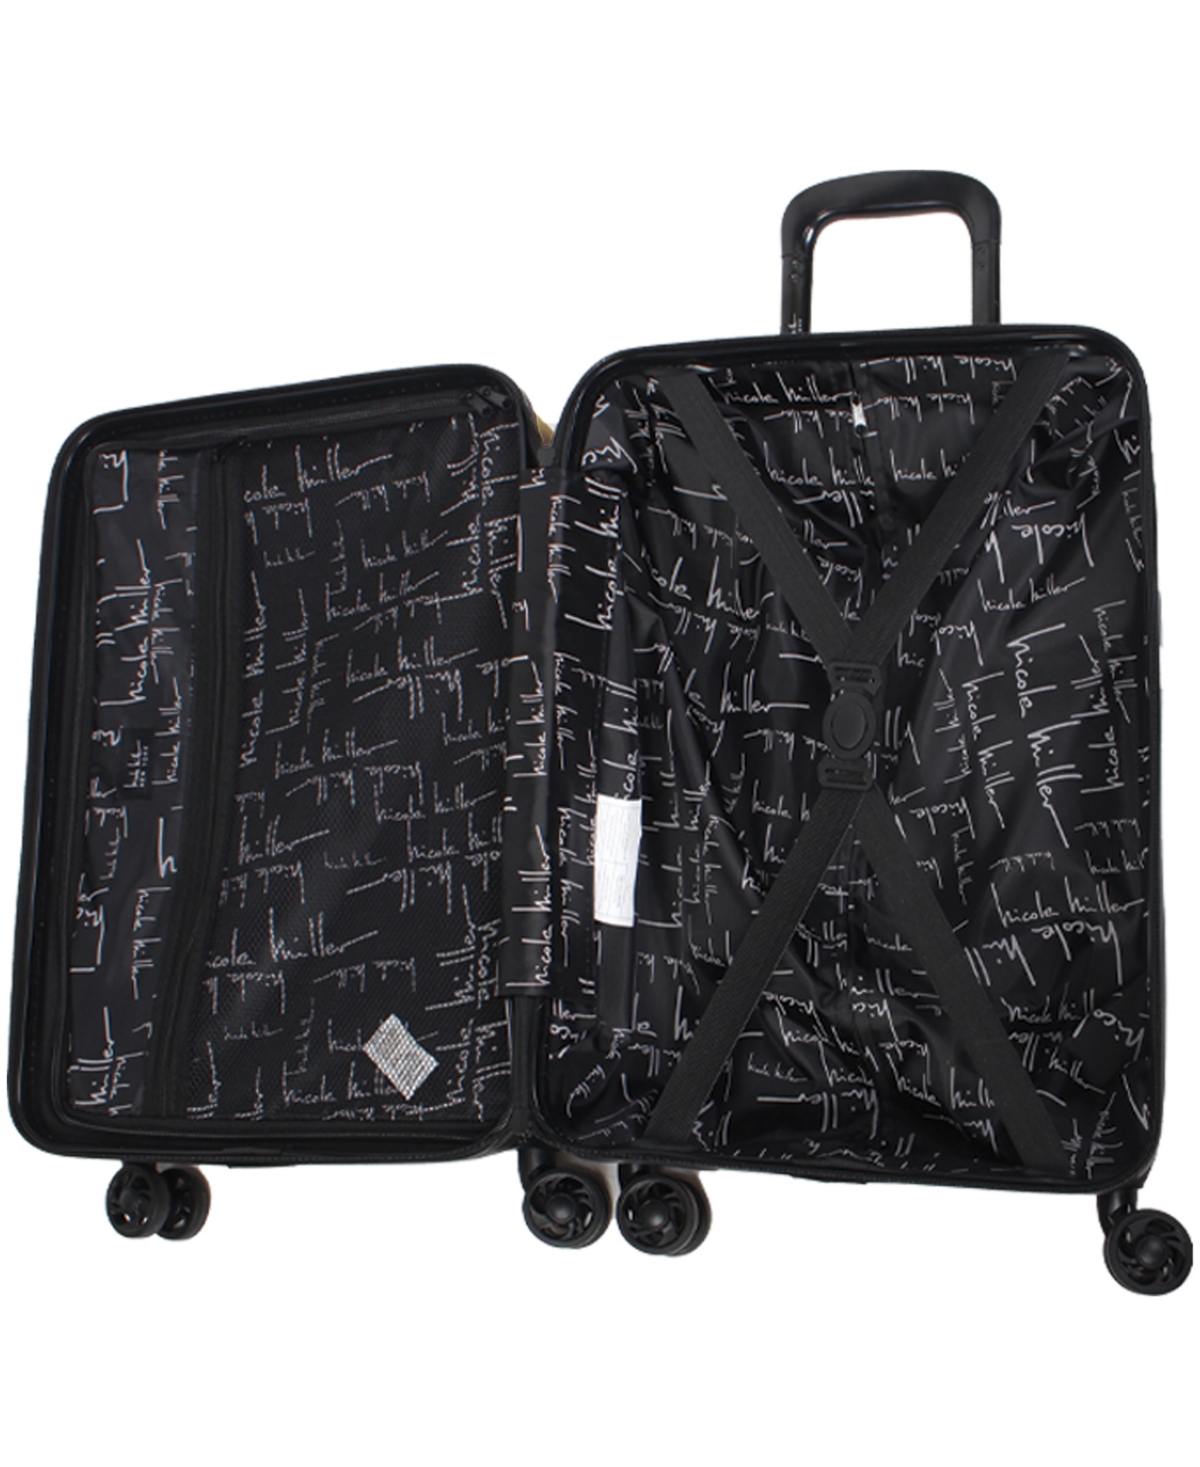 Shop Nicole Miller Fanciful 3 Piece Luggage Set In Silver